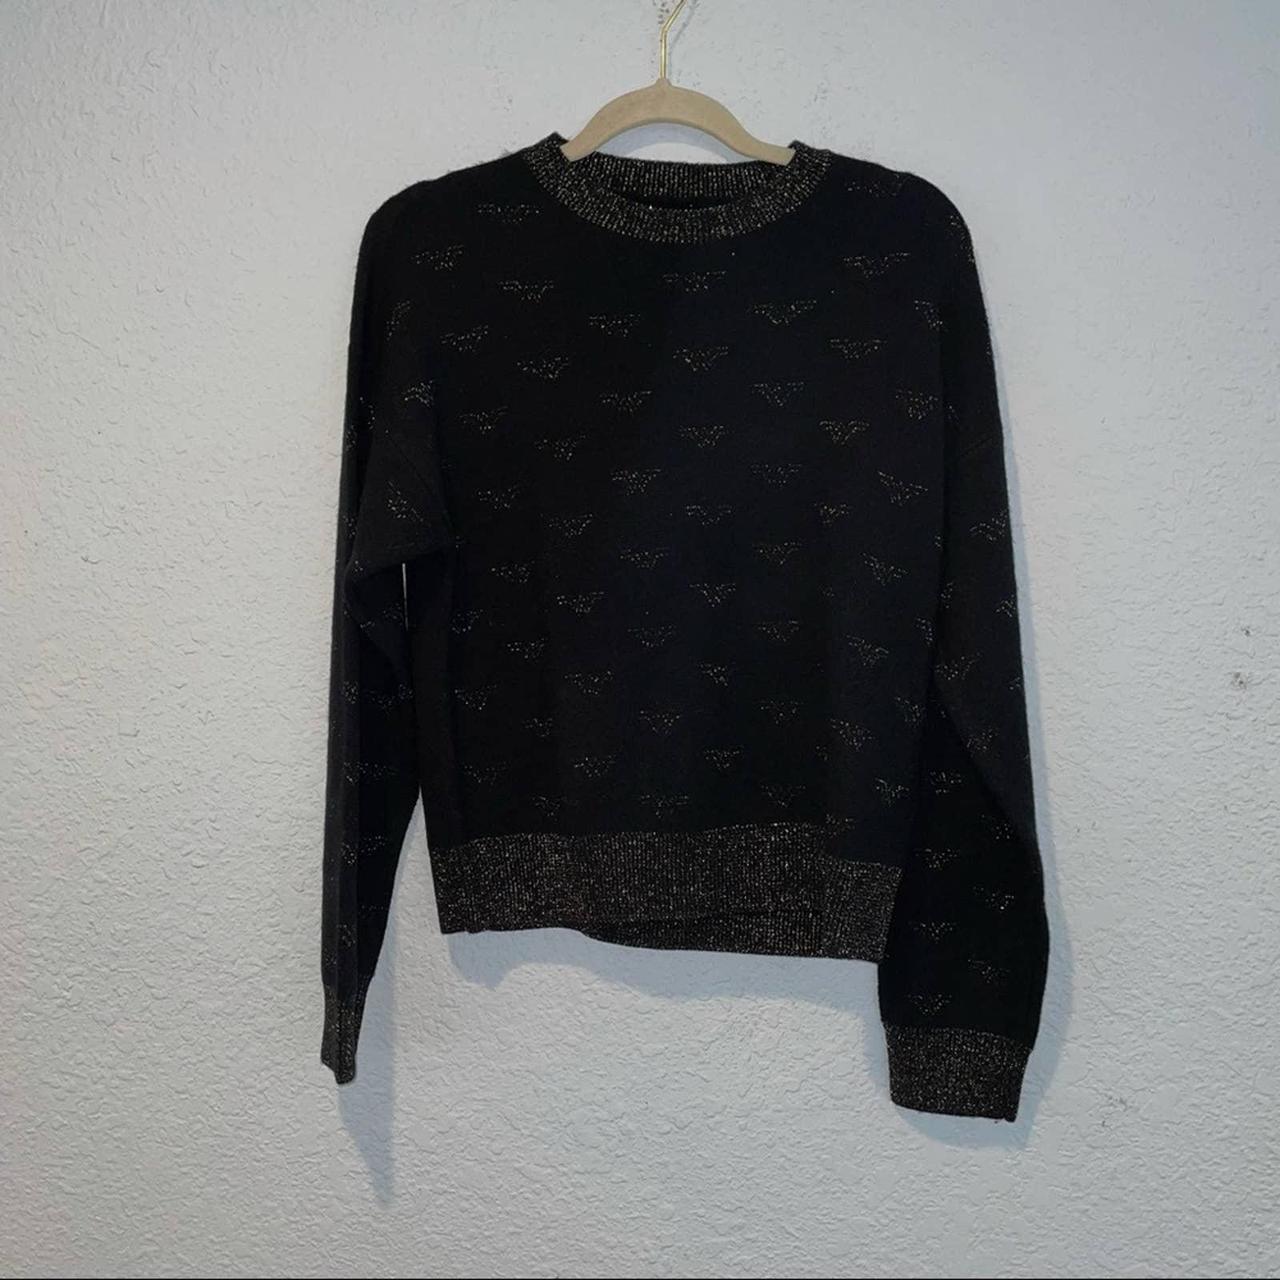 Product Image 1 - Brand: Re/Done
Style: 80s Metallic Sweater
Size: